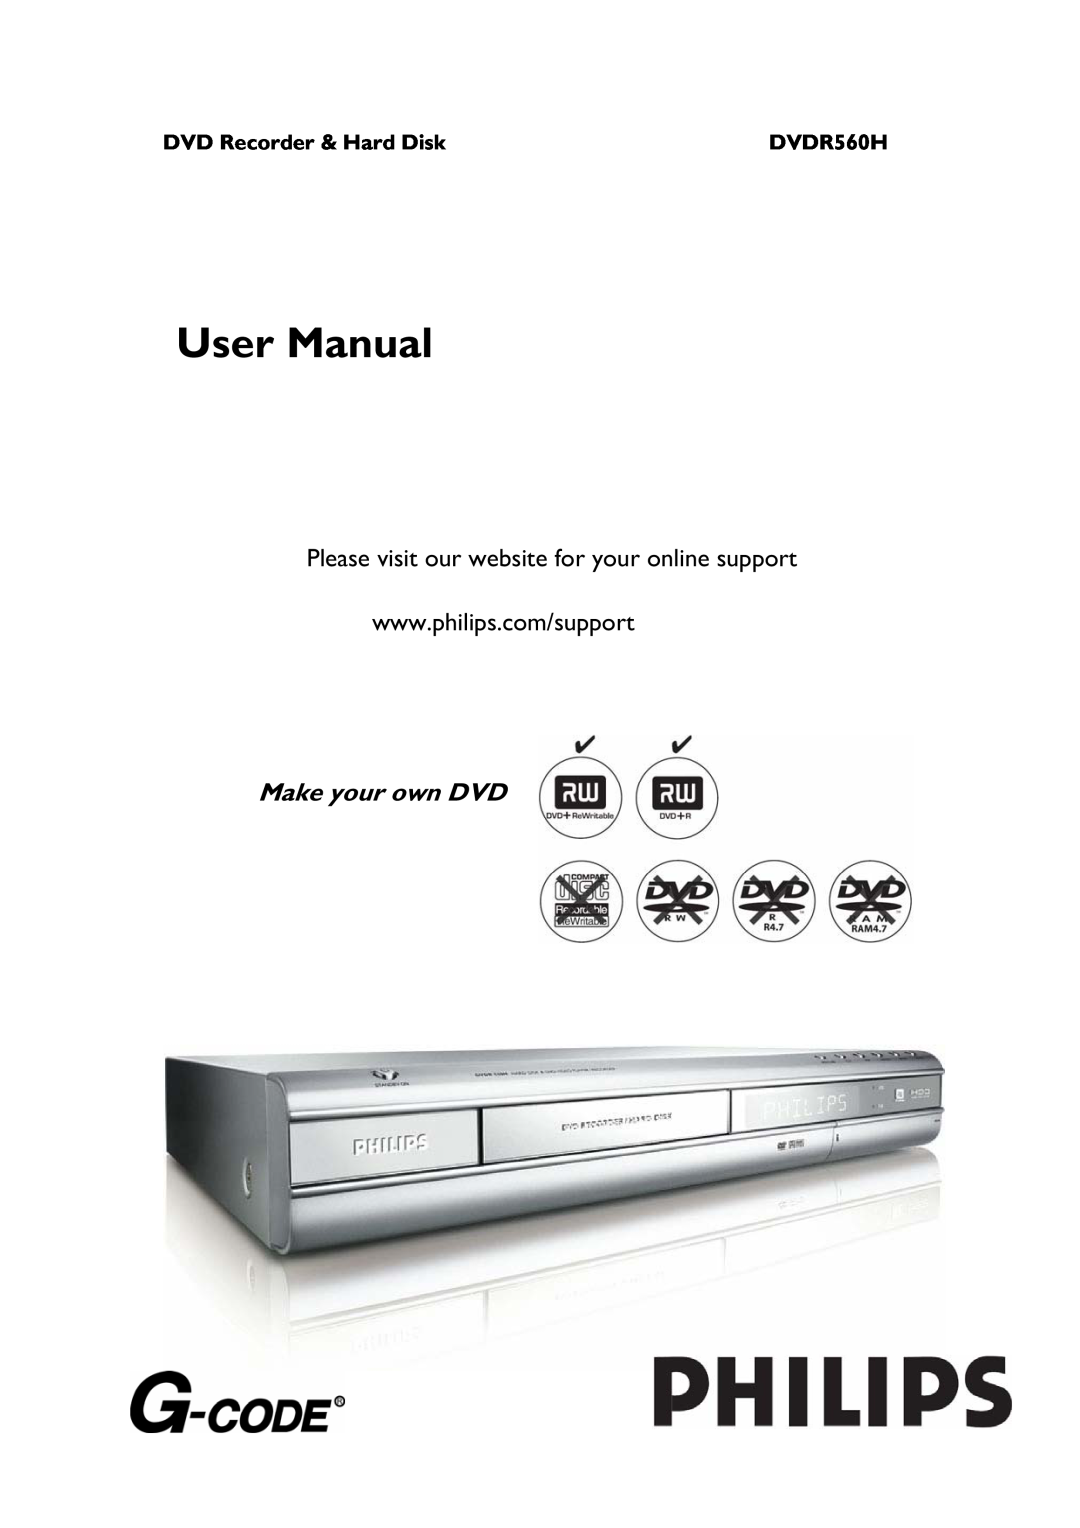 Philips DVDR560H user manual DVD Recorder & Hard Disk, Please visit our website for your online support, Make your own DVD 